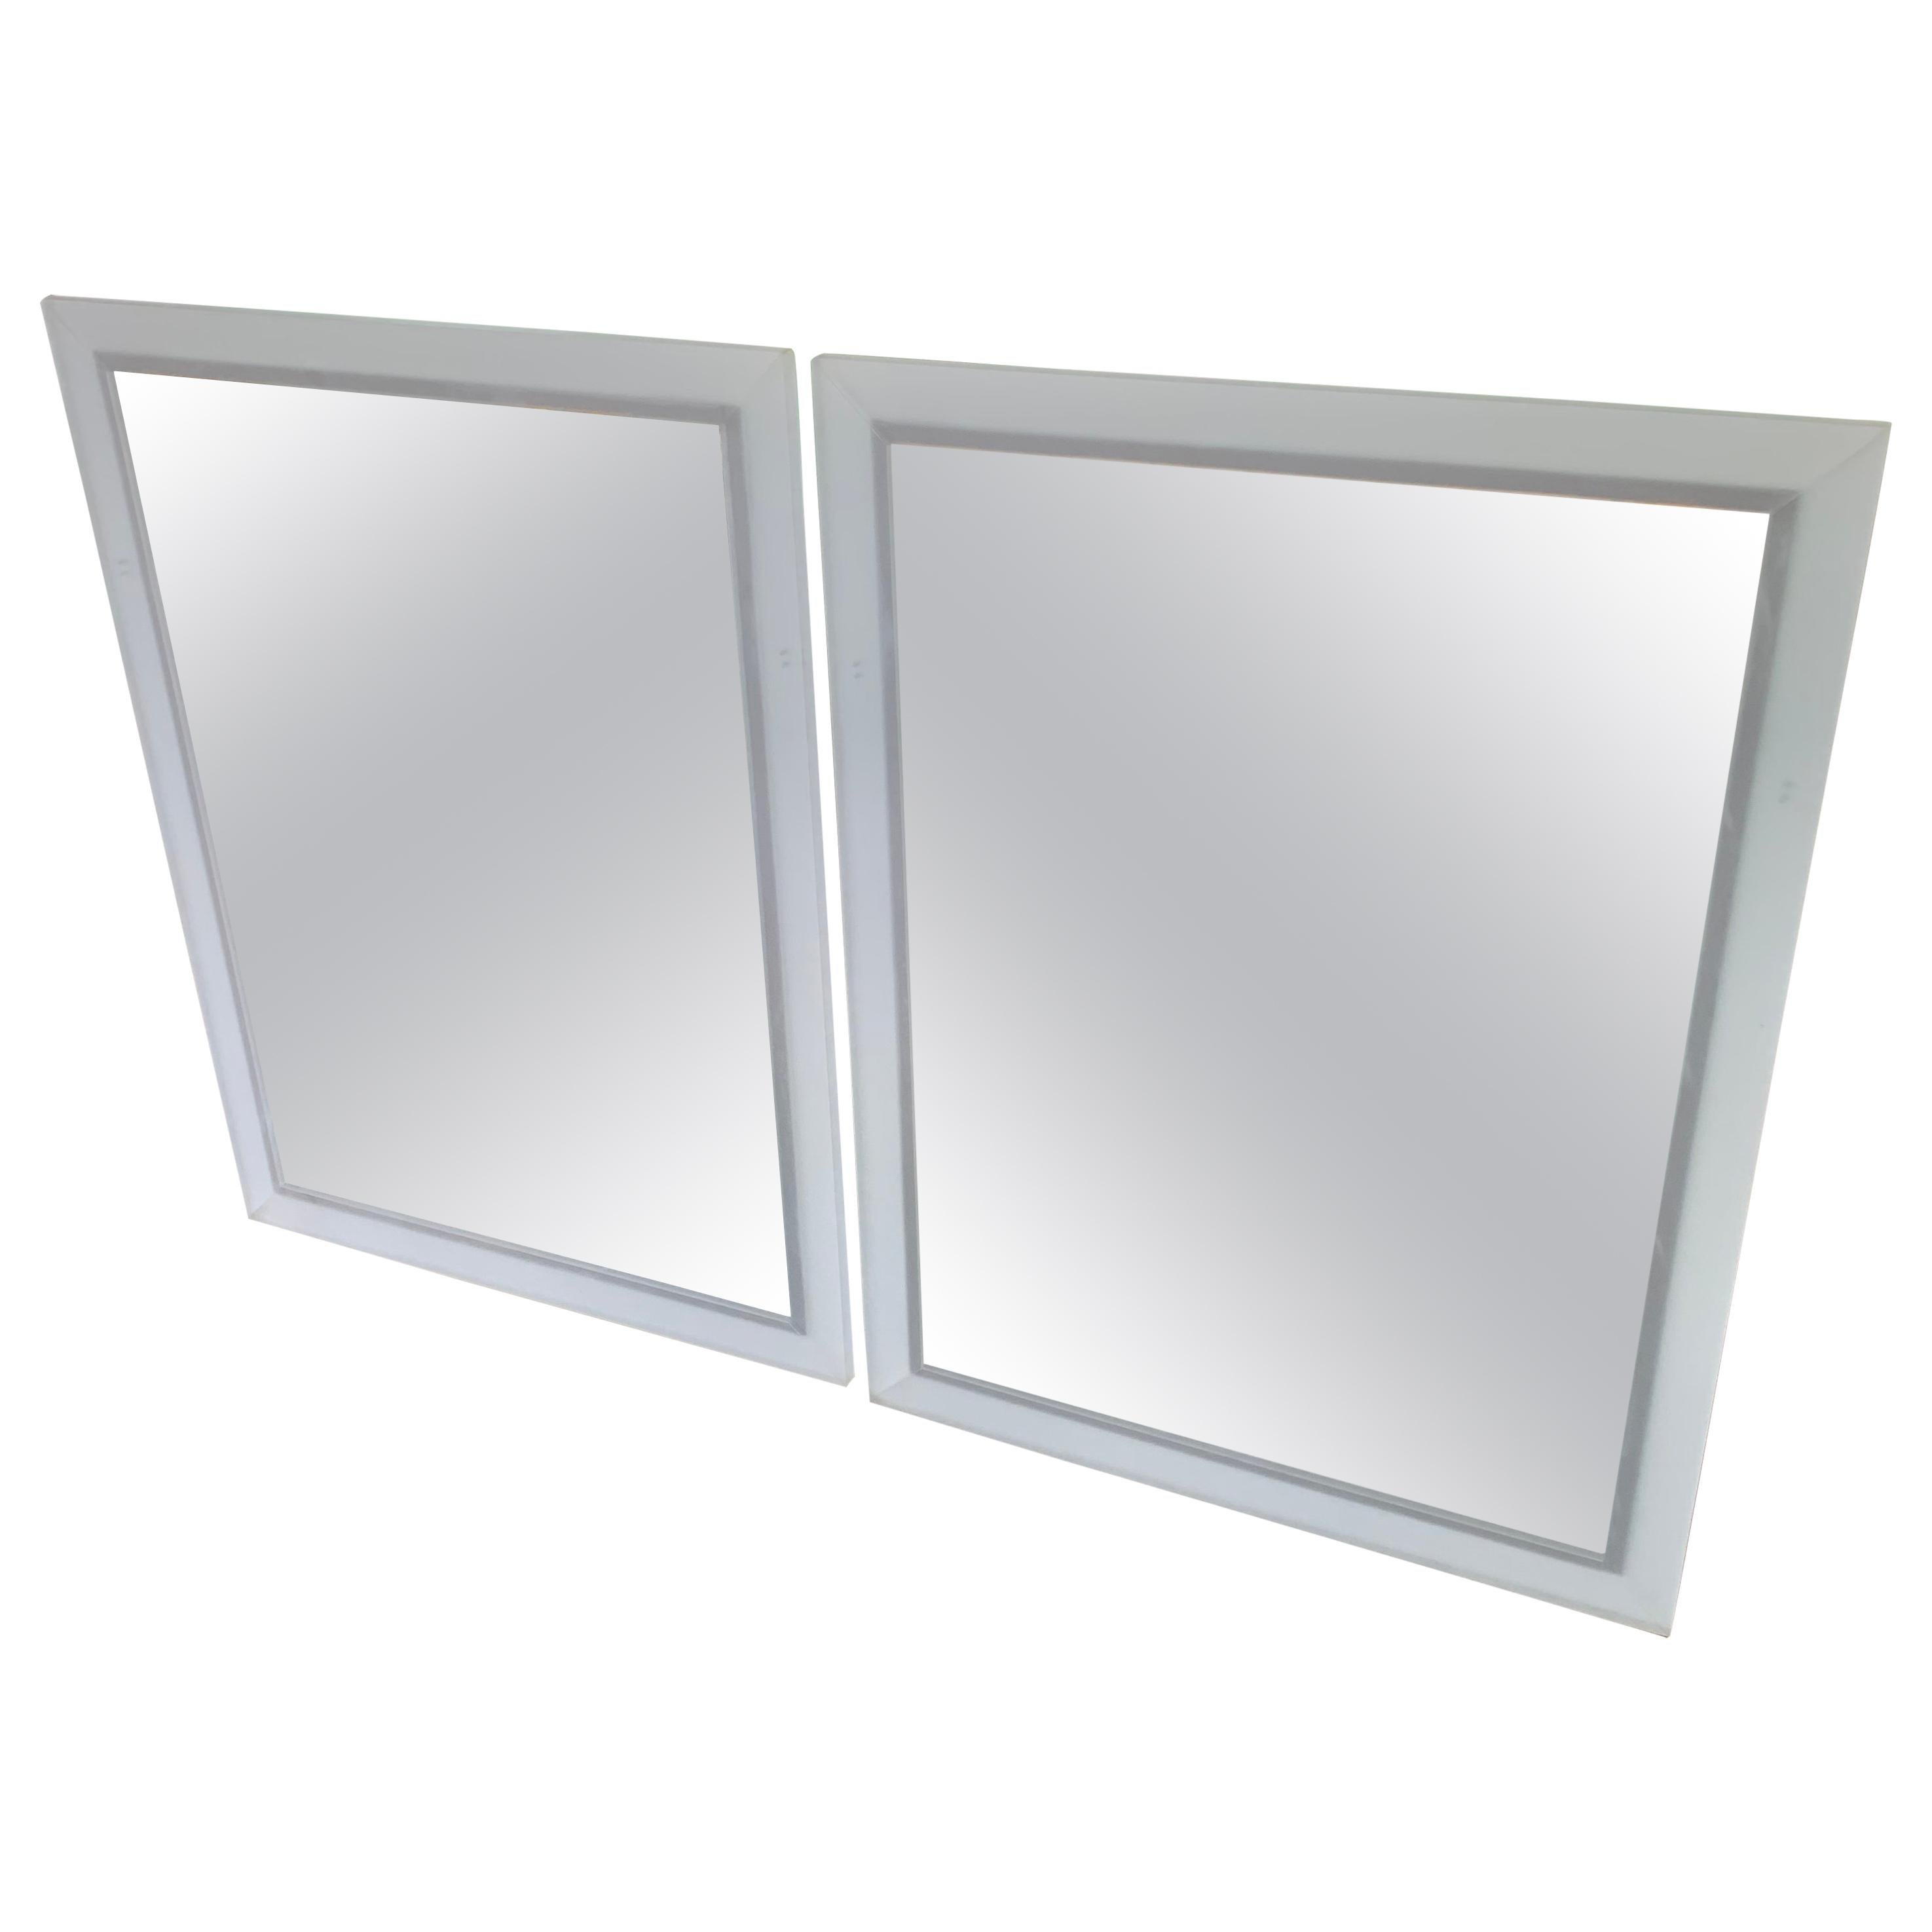 Lucite Floor Mirrors and Full-Length Mirrors